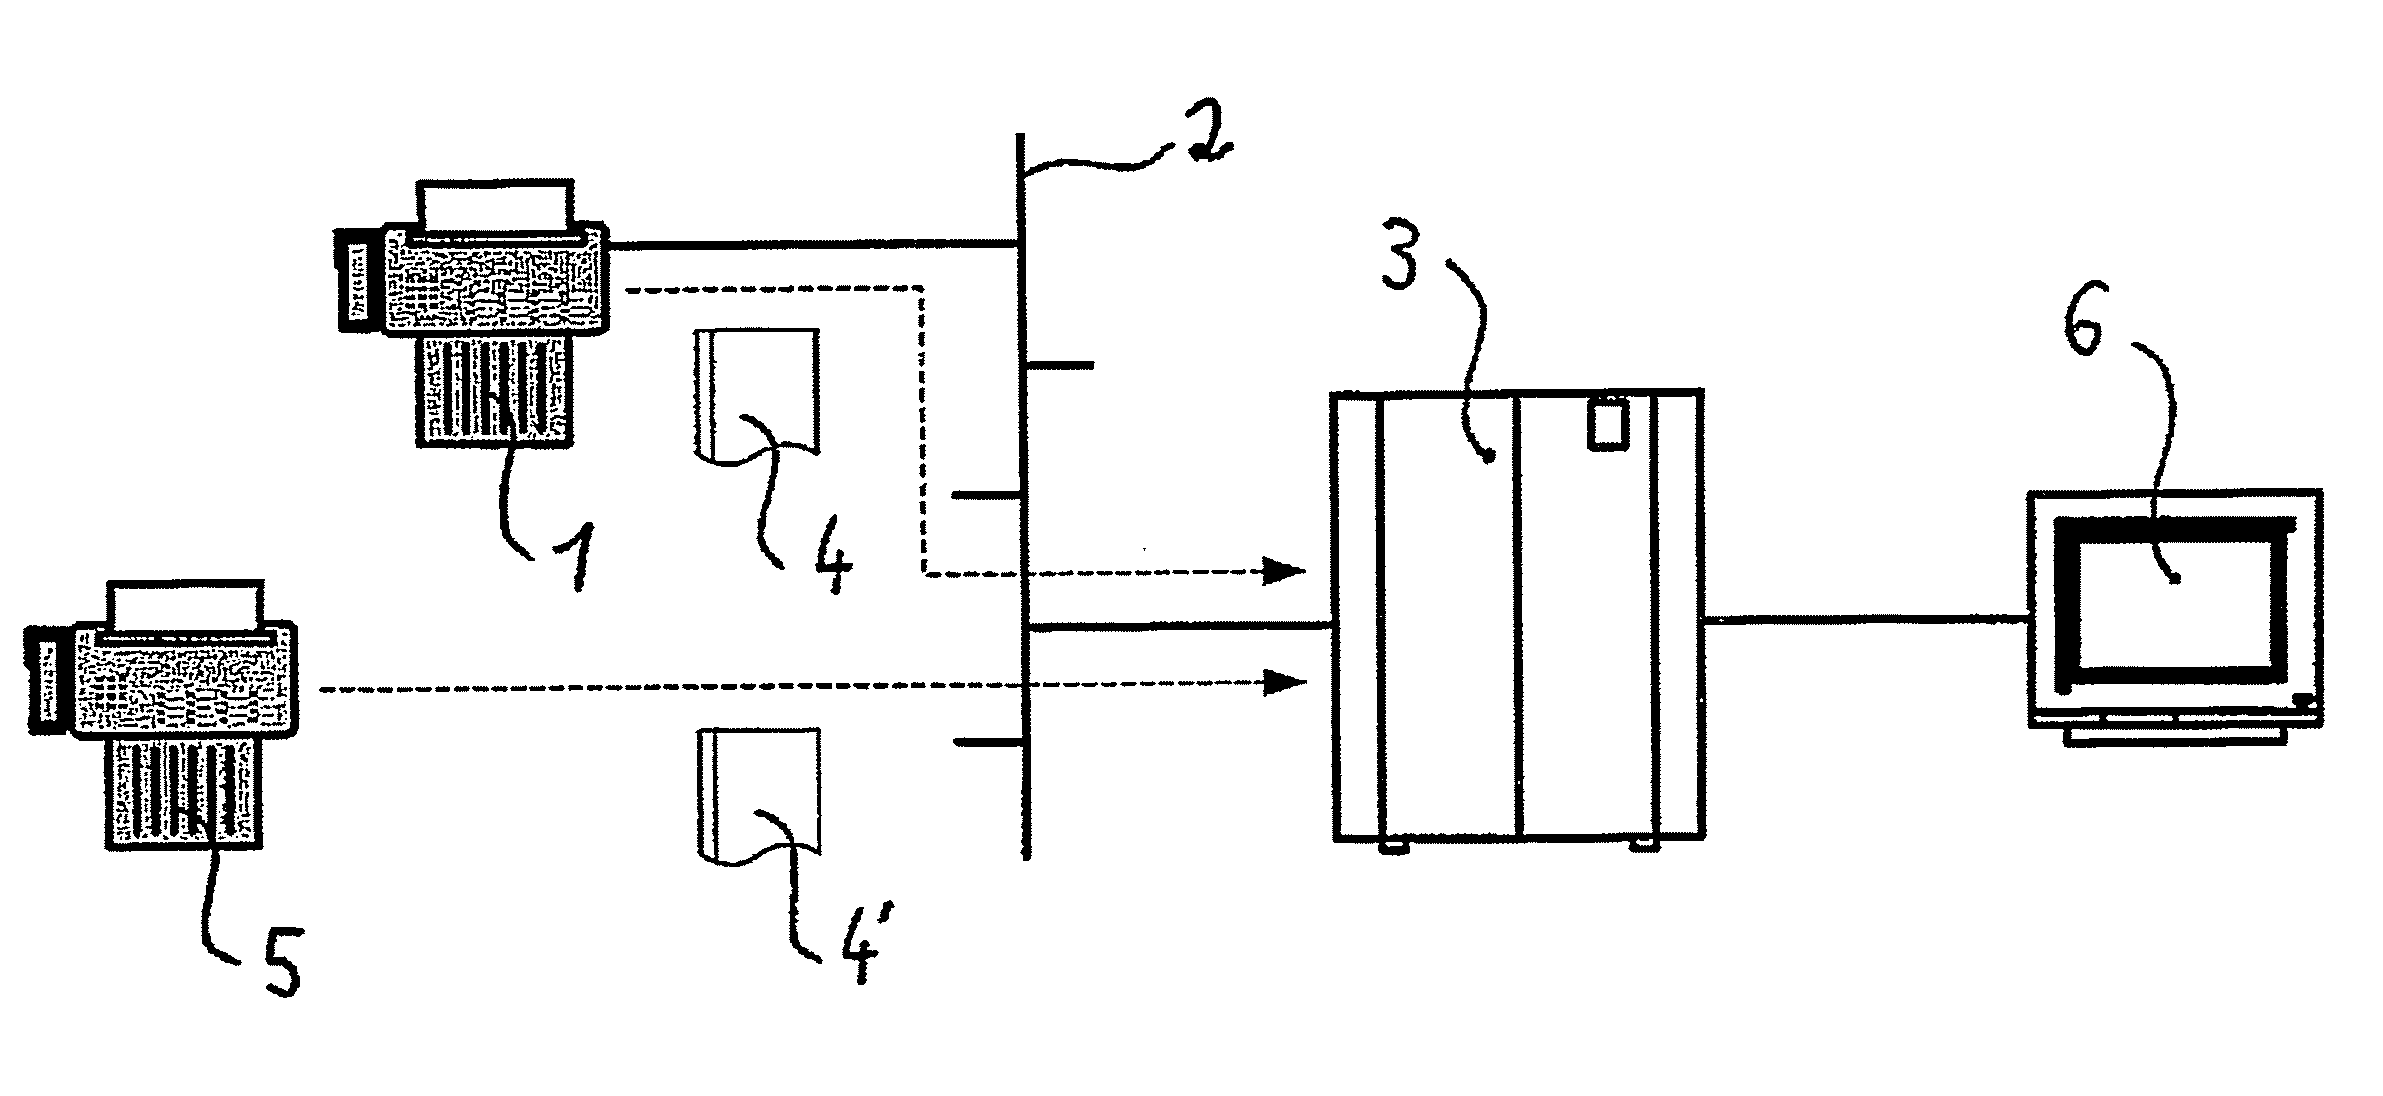 Method for replacement of a defective field device by a new field device in a system which communicates via a digital fieldbus, in particular an automation system